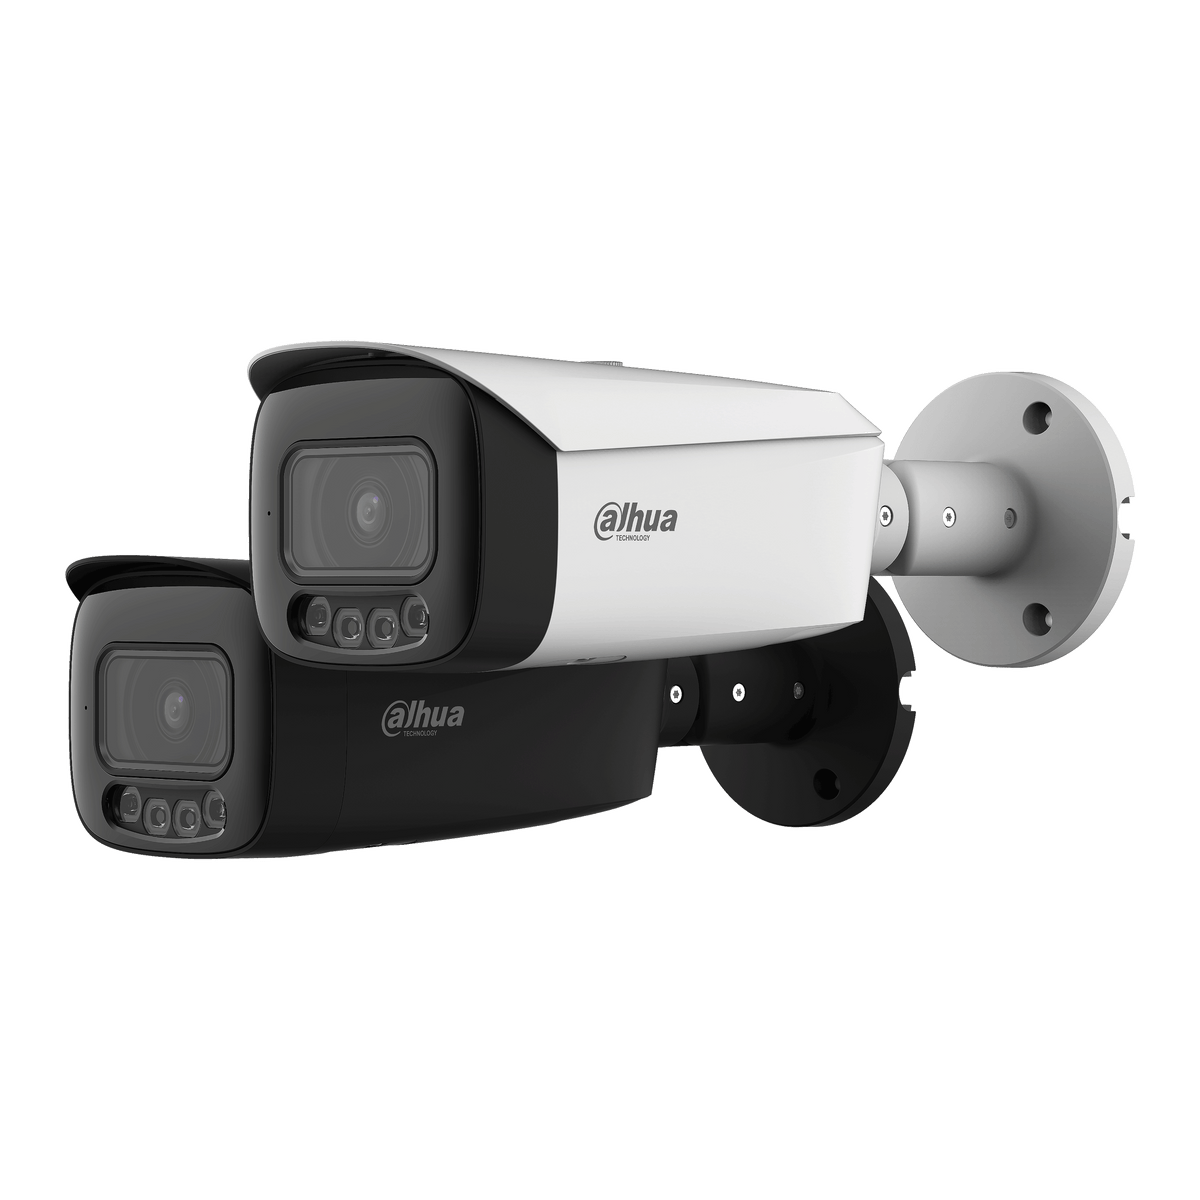 DAHUA IPC-HFW3549T1-AS-PV 5MP Full-color Active Deterrence Fixed-focal Bullet WizSense Network Camera